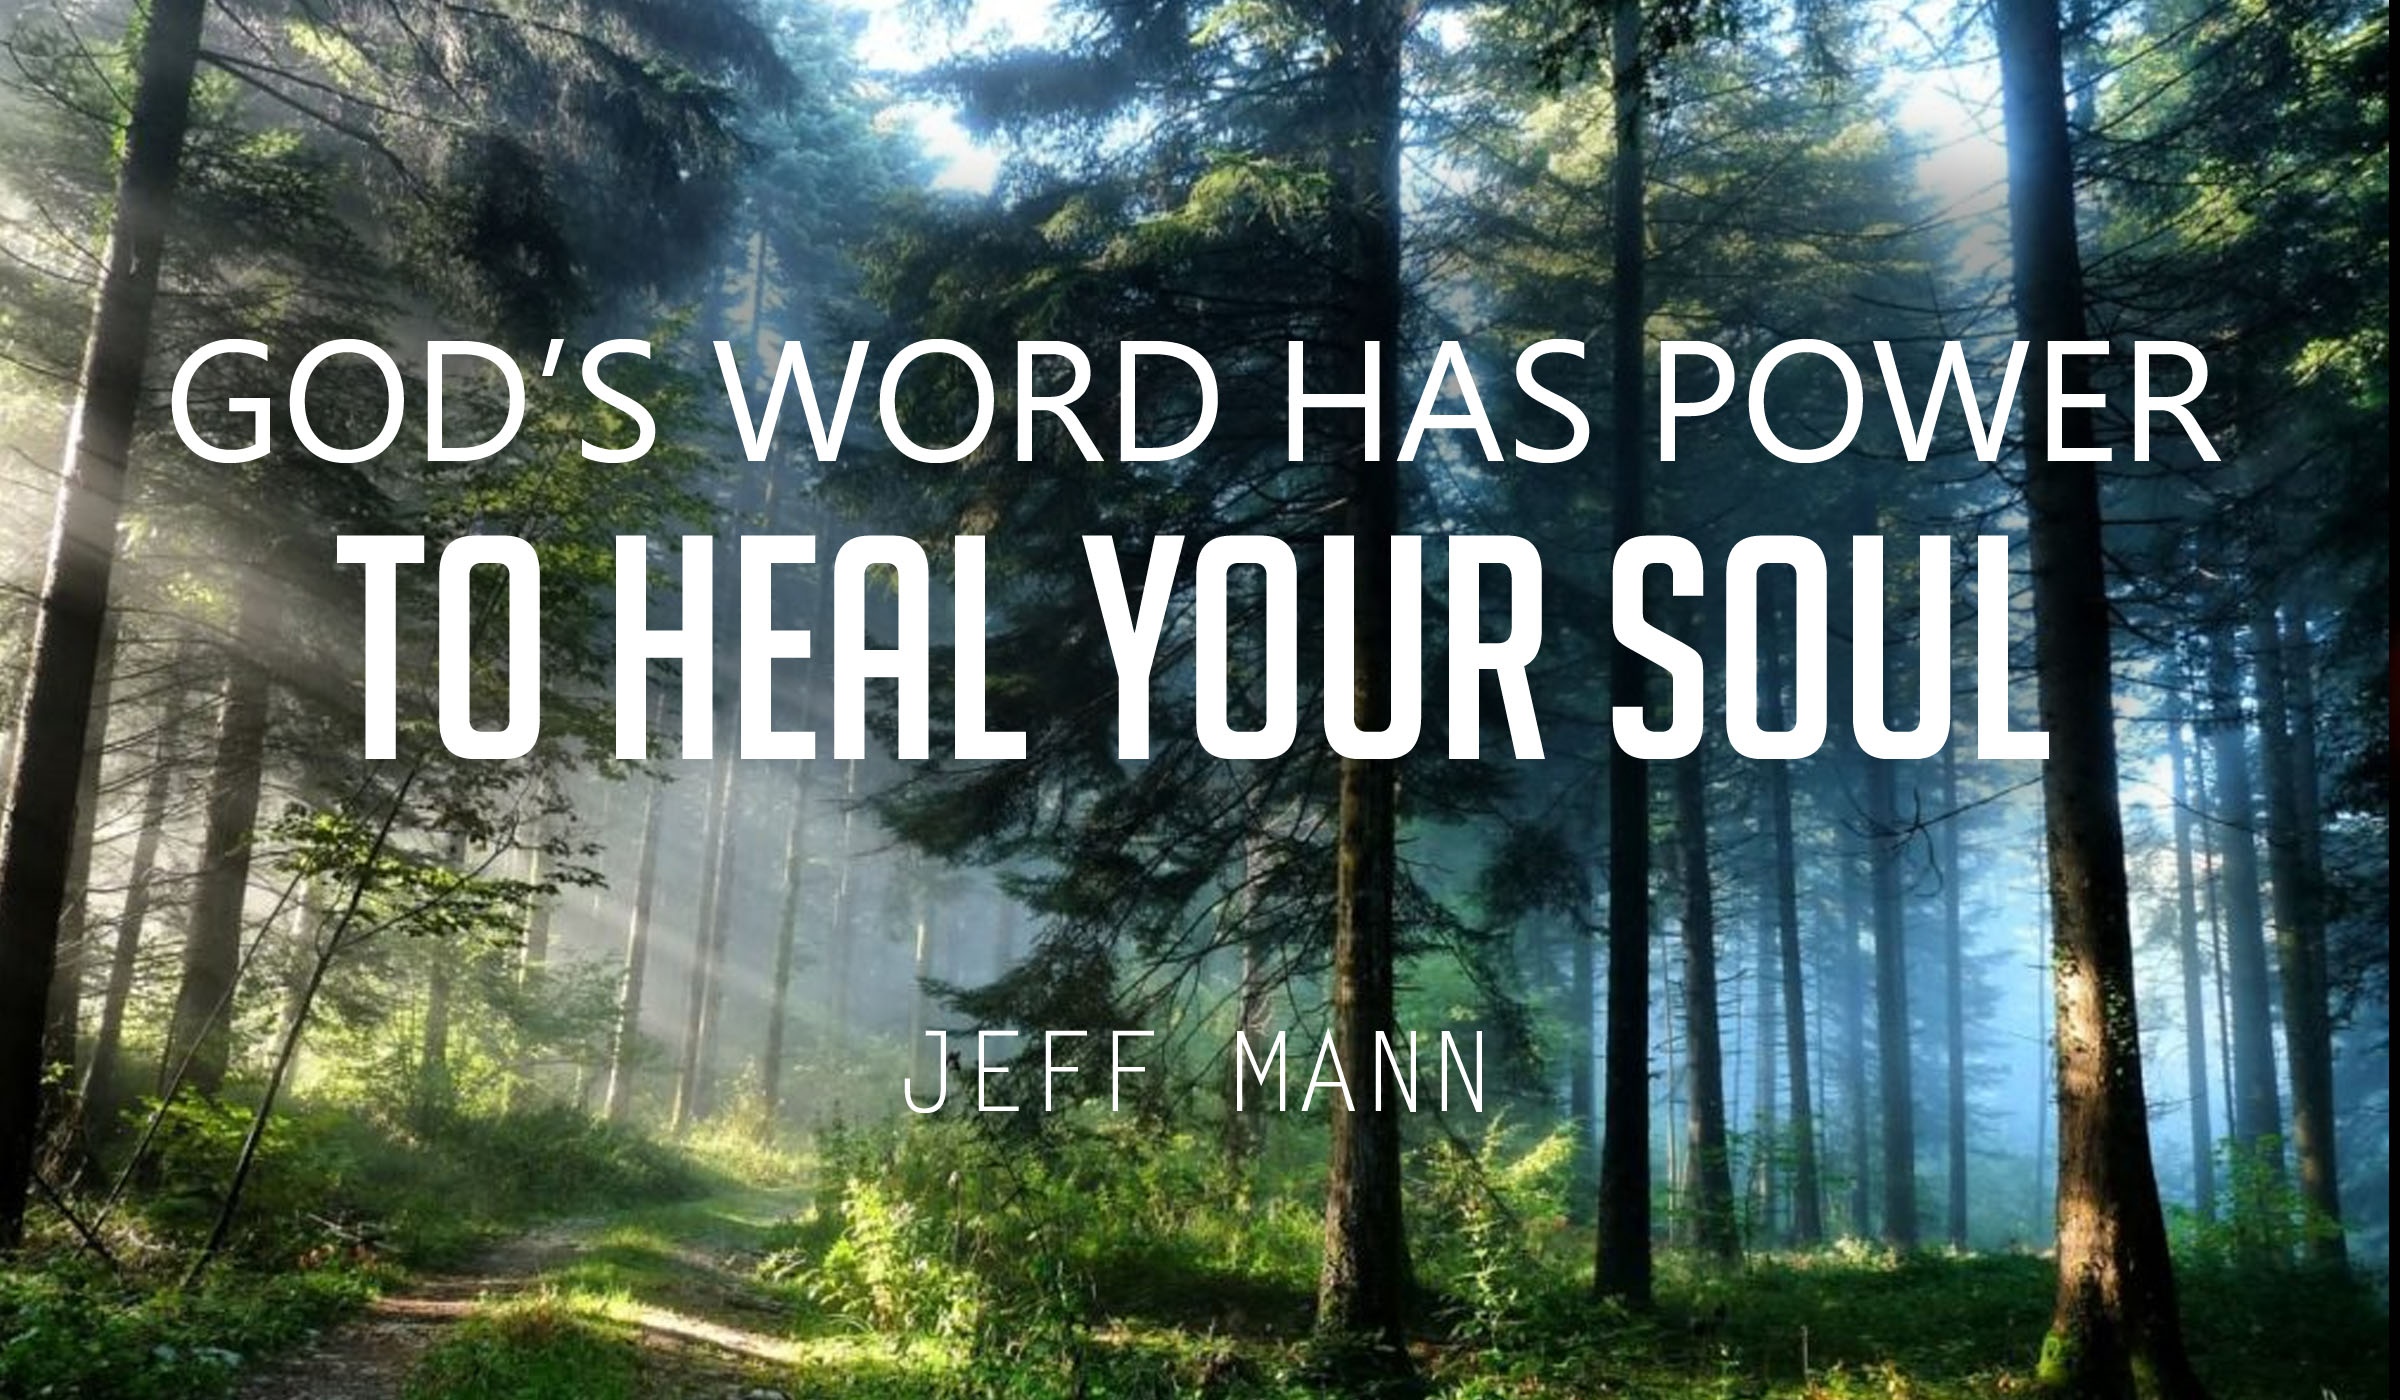 God’s Word Has Power To Heal Your Soul